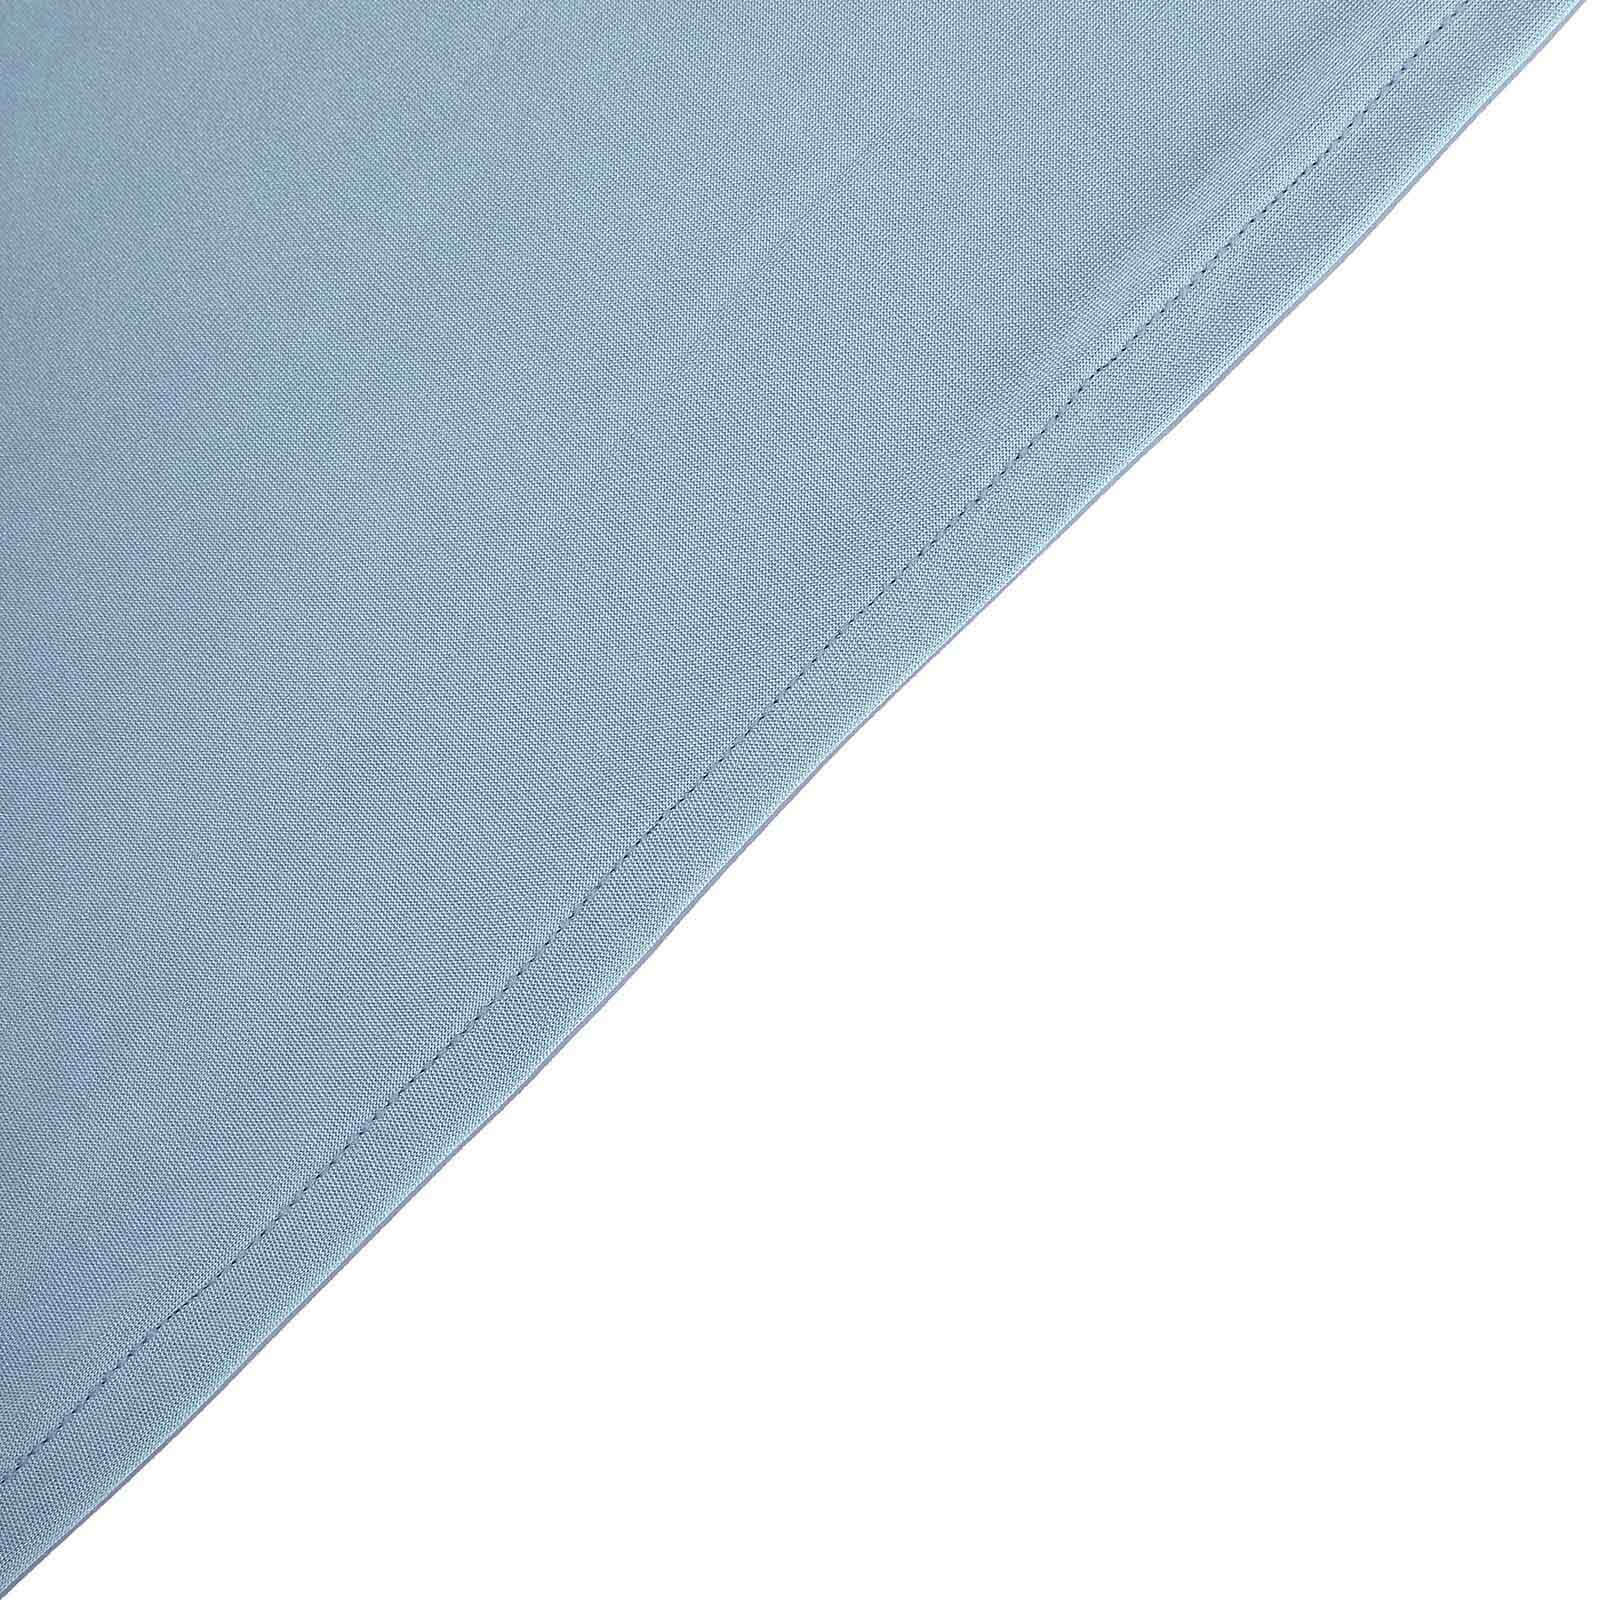 6FT Rectangular Stretch Spandex Tablecloth | TableclothsFactory